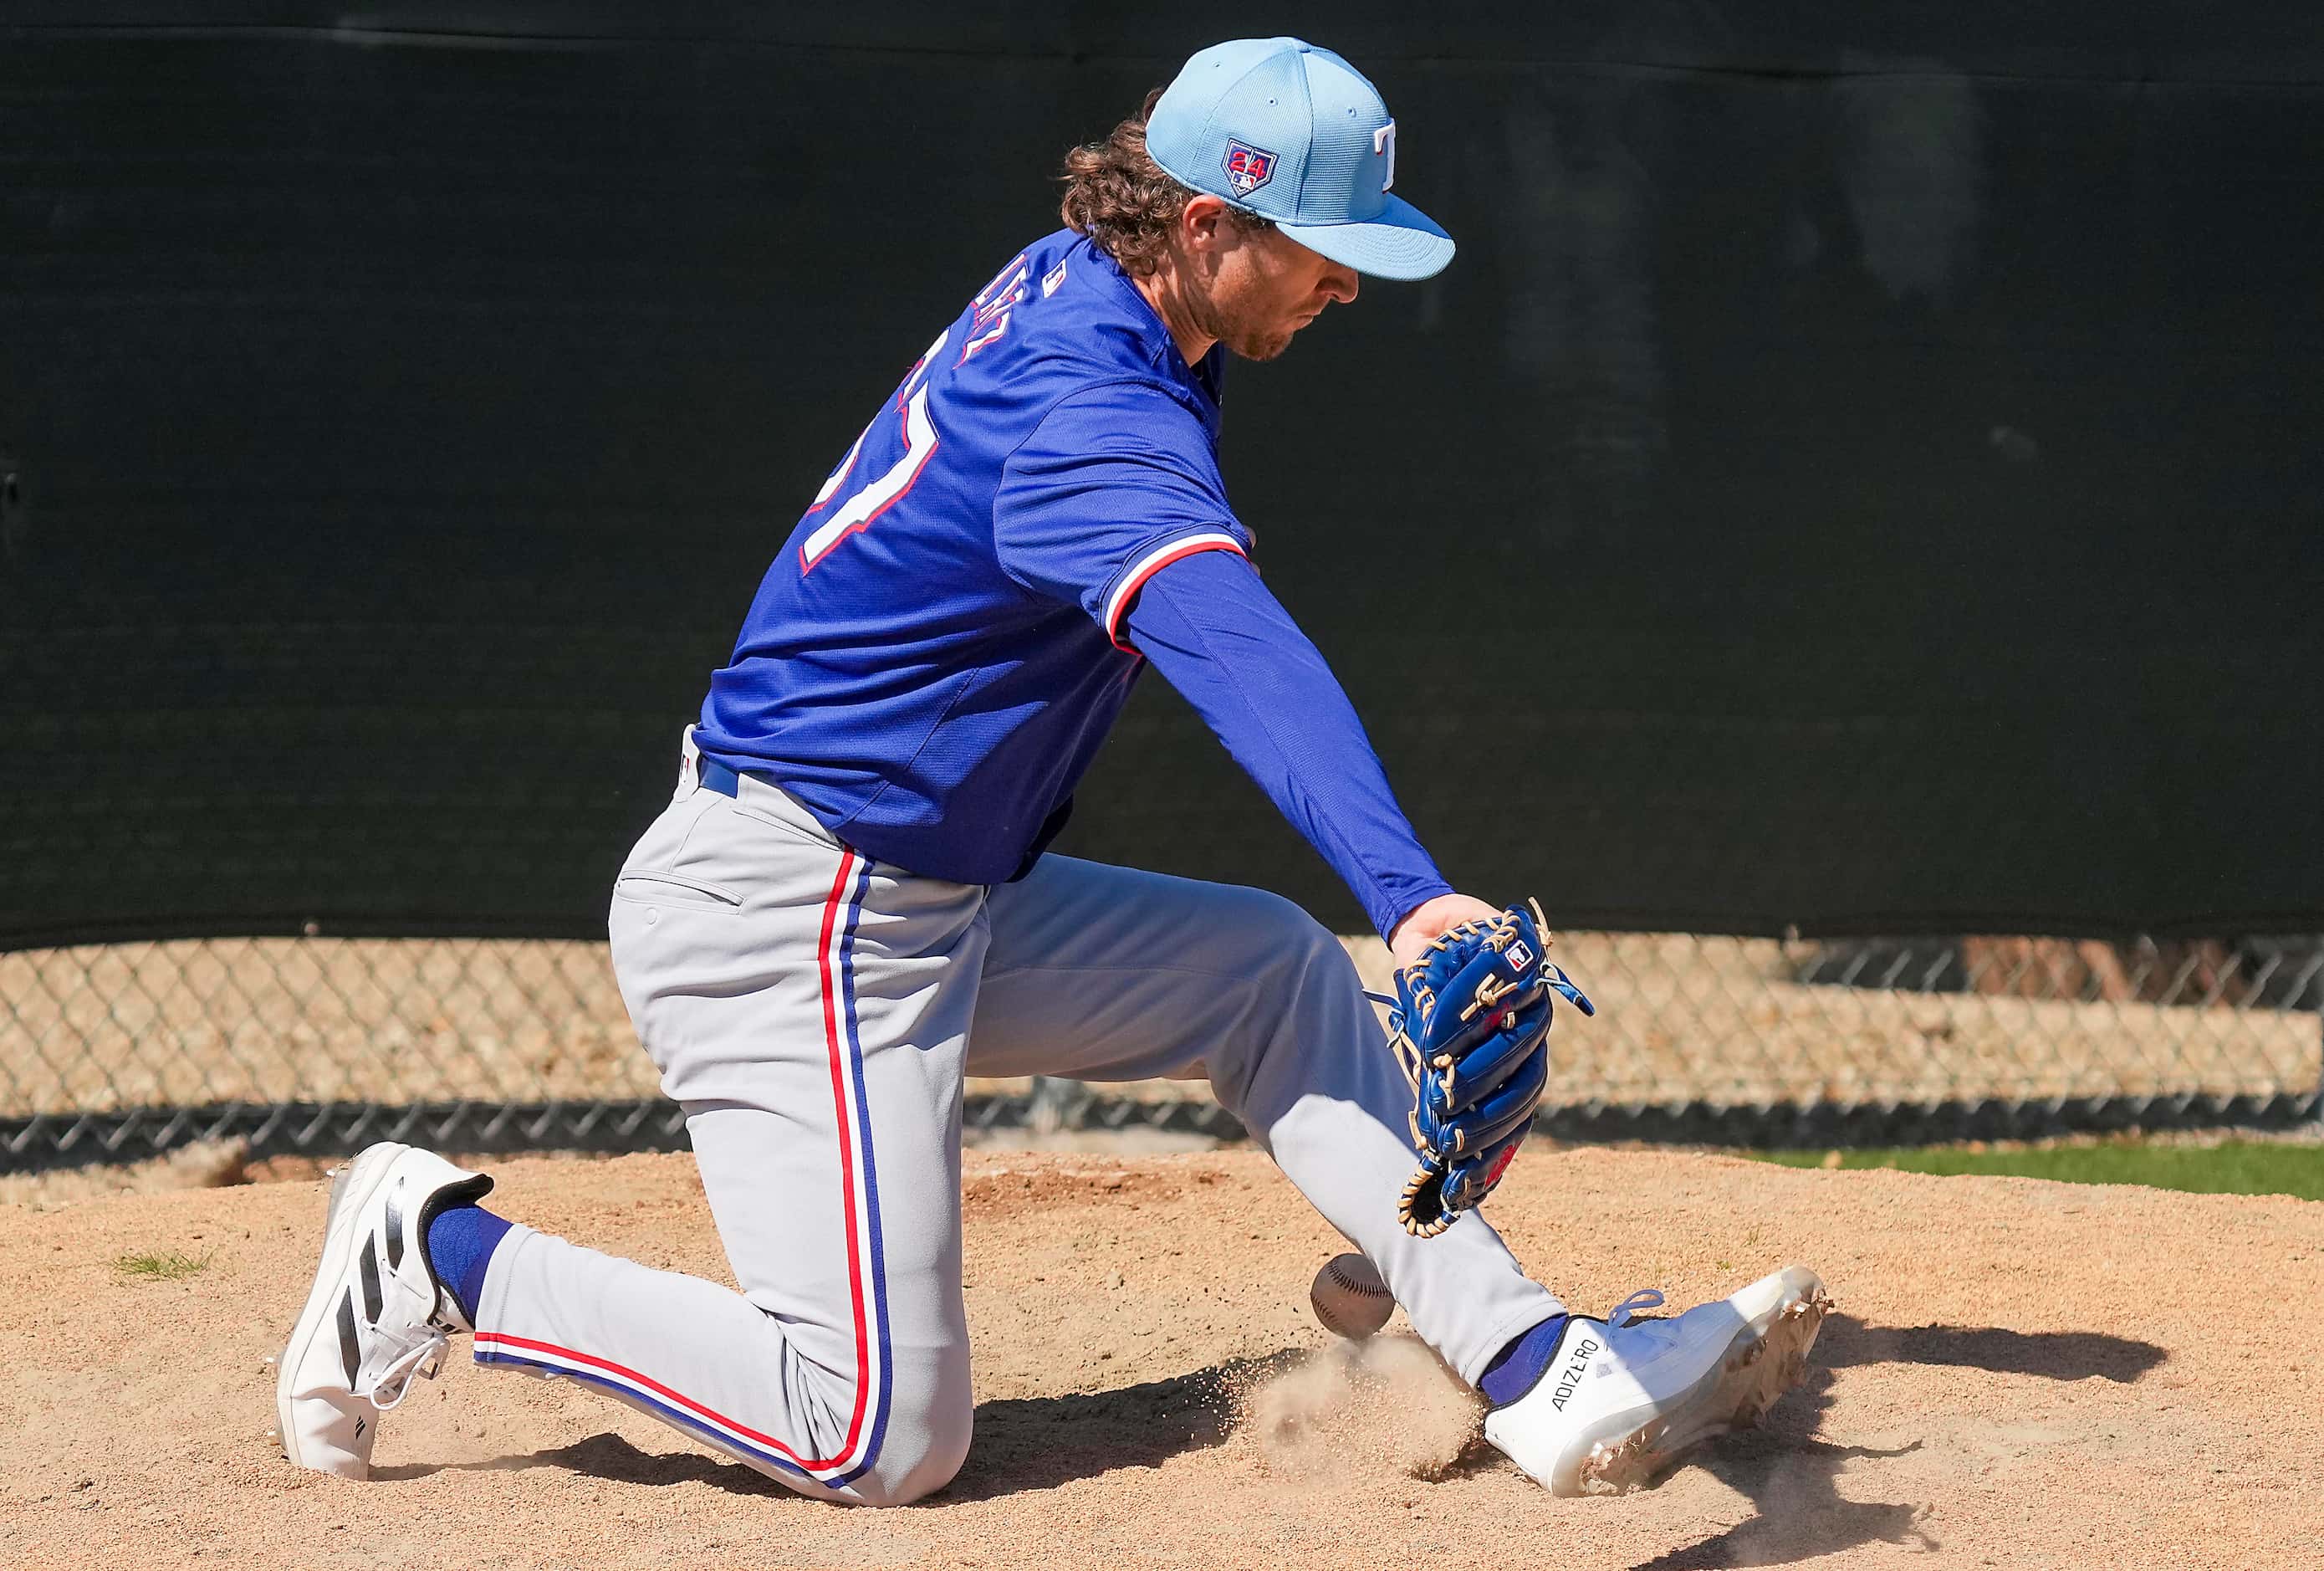 Texas Rangers pitcher Jake Latz tries to make a play on a sharp grounder back to the mound...